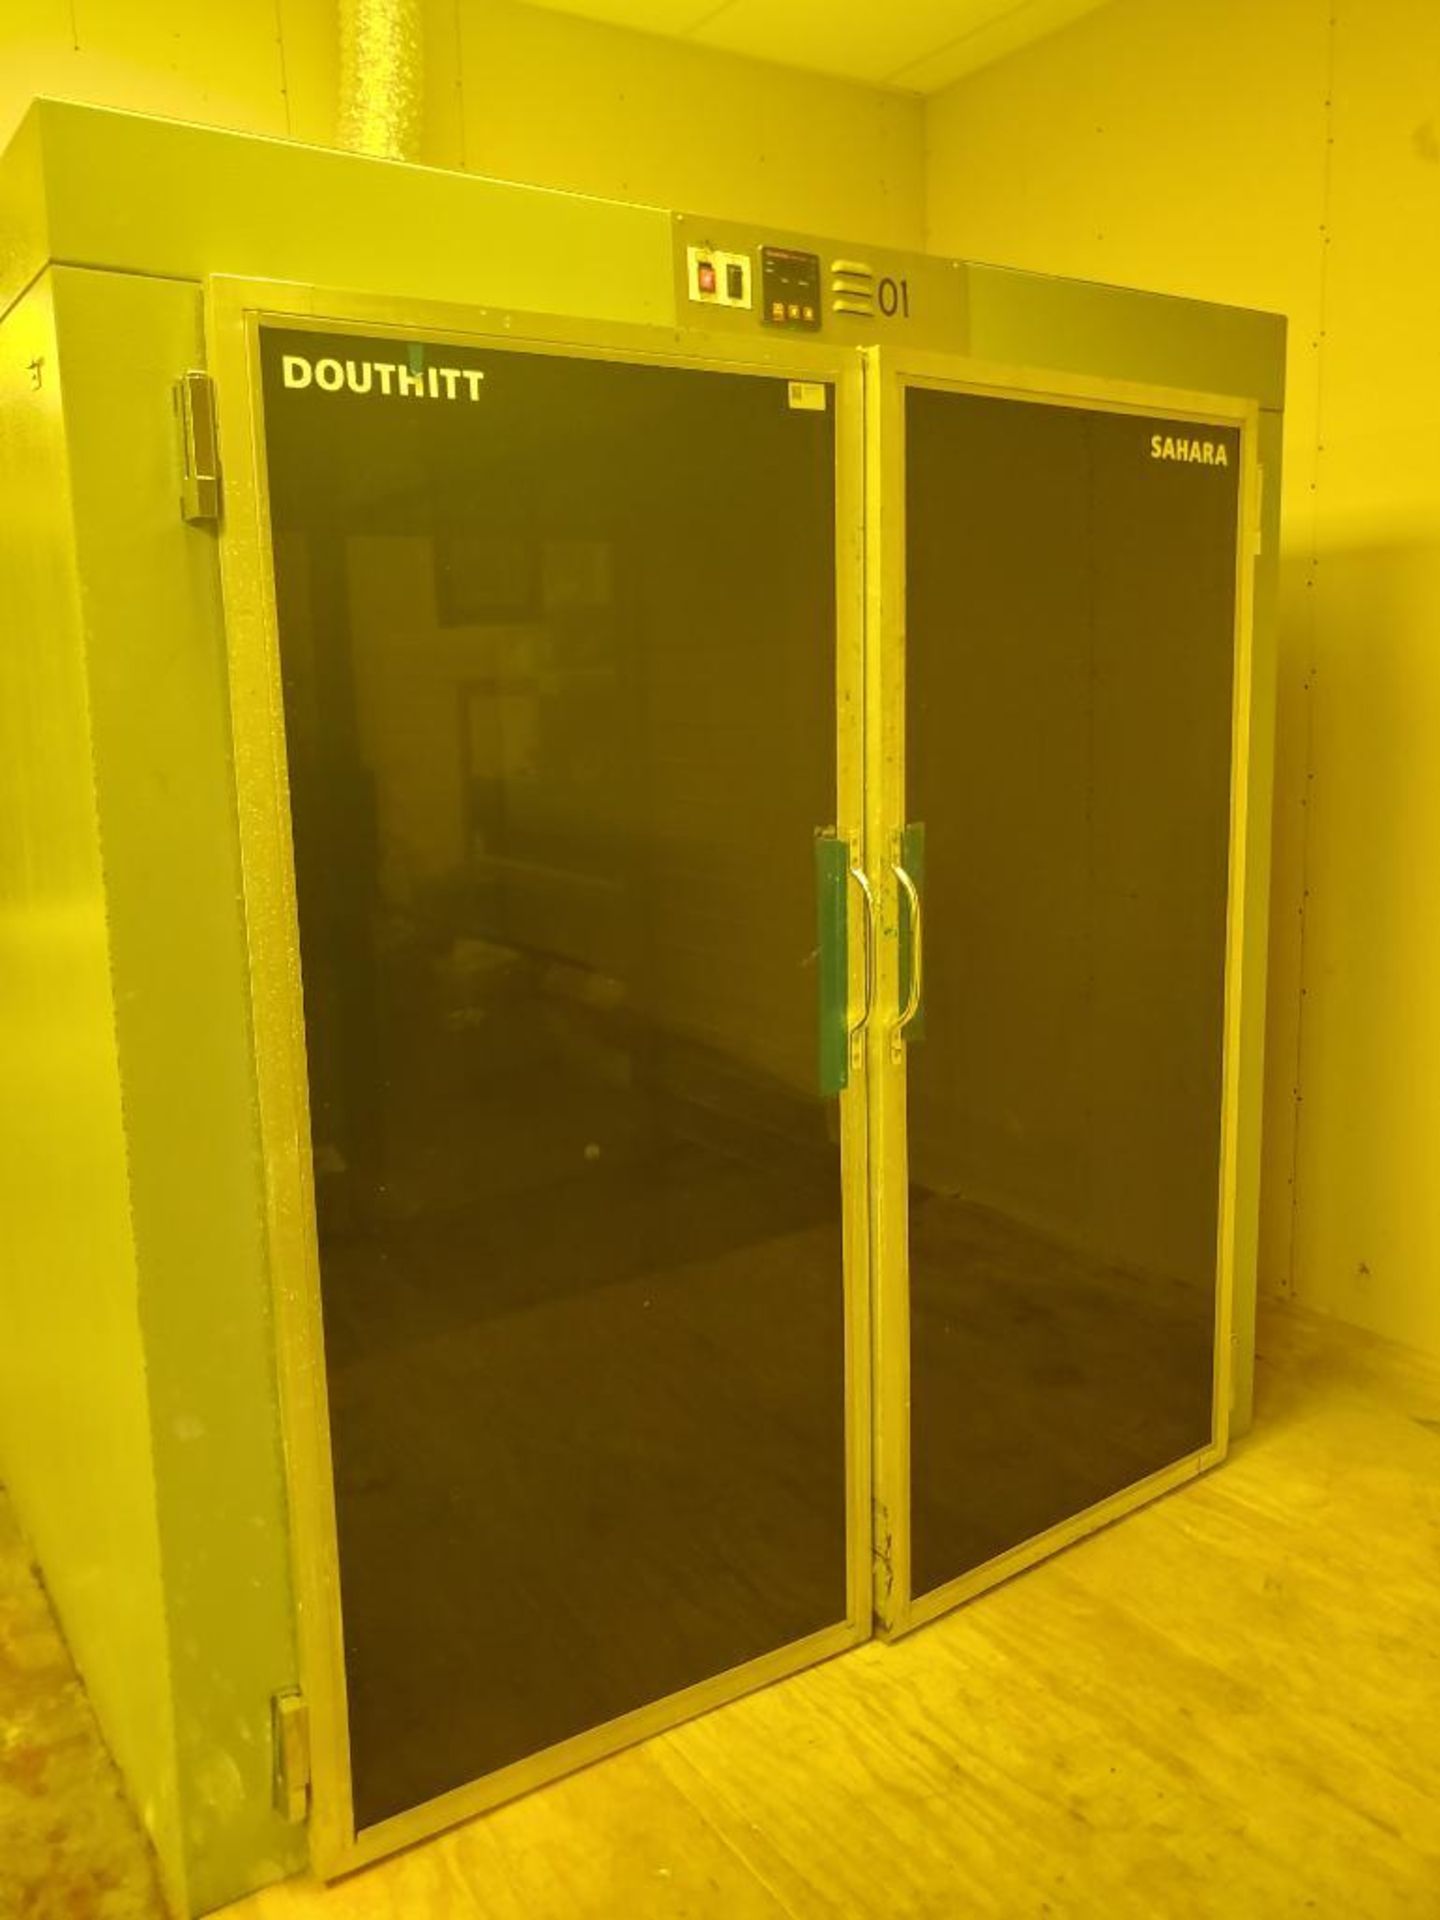 DOUTHITT SCREEN DRYER BOOTH; NO. 77814, 14-AMPS, A/C, 240-VOLTS, 60-HZ, 1-PHASE, 25X36 SCREENS, DRO - Image 3 of 4